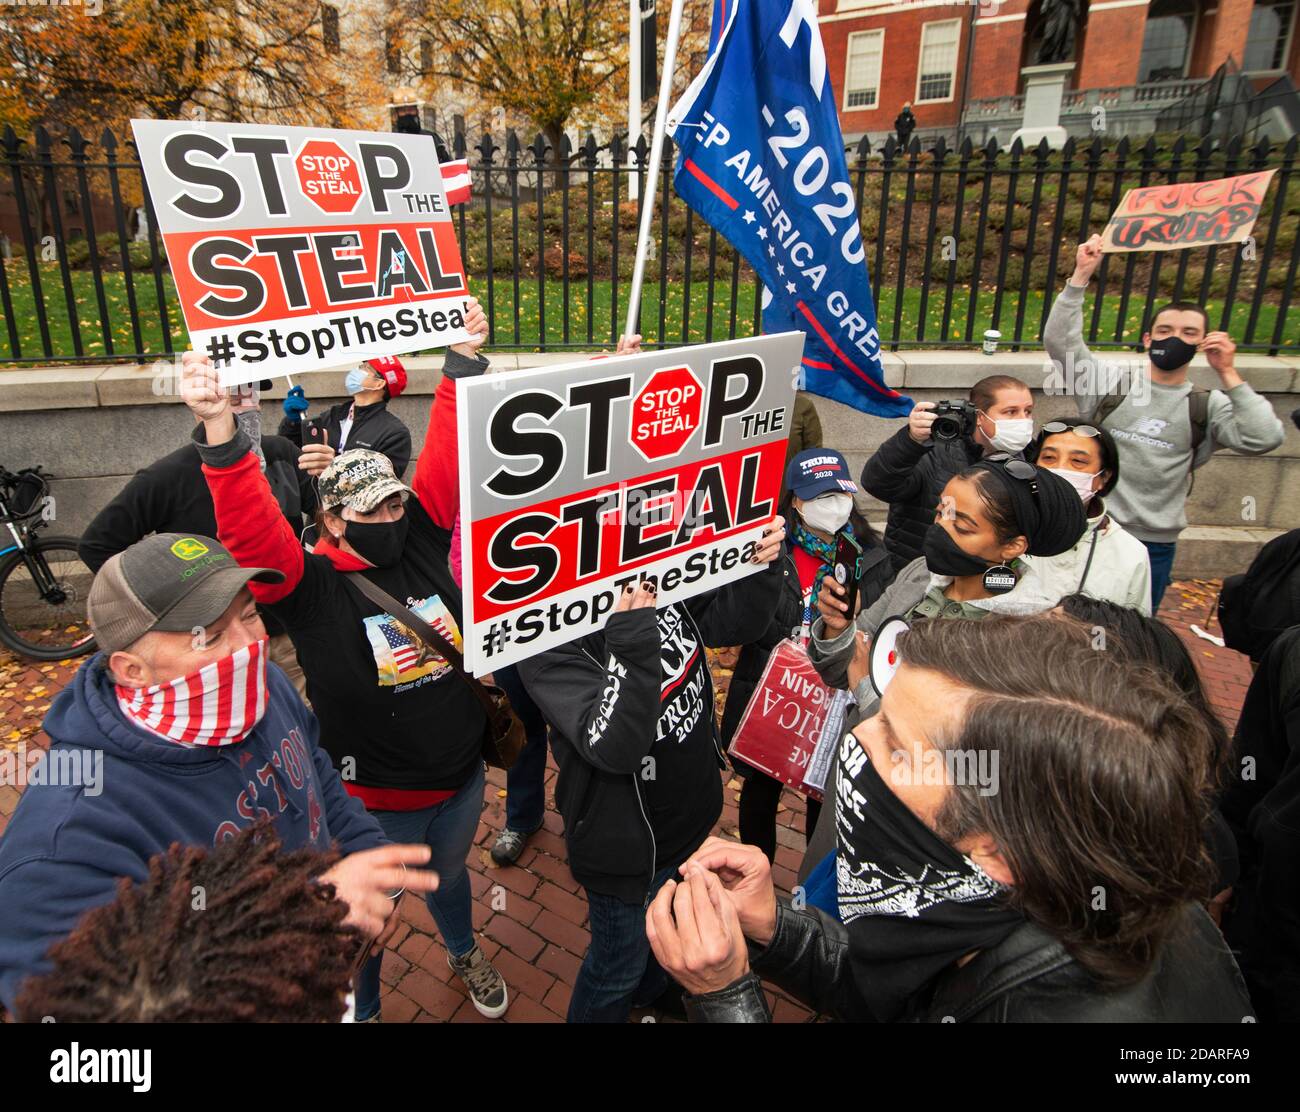 Stop The Steal, Massachusetts State House, Boston, Massachusetts, USA. 14 Nov. 2020.  A small group of supporters of current U.S. president Donald Trump faced off with Anti-Trump, Refuse Fascism, demonstrators in front of the Massachusetts State House.  The Trump supporters carried signs printed with “Stop The Steal” echoing Trump’s claim that the Democrats have stolen the 2020 election.  Stop The Steal demonstrations happened around the United States on Saturday. Credit: Chuck Nacke / Alamy Live News Stock Photo